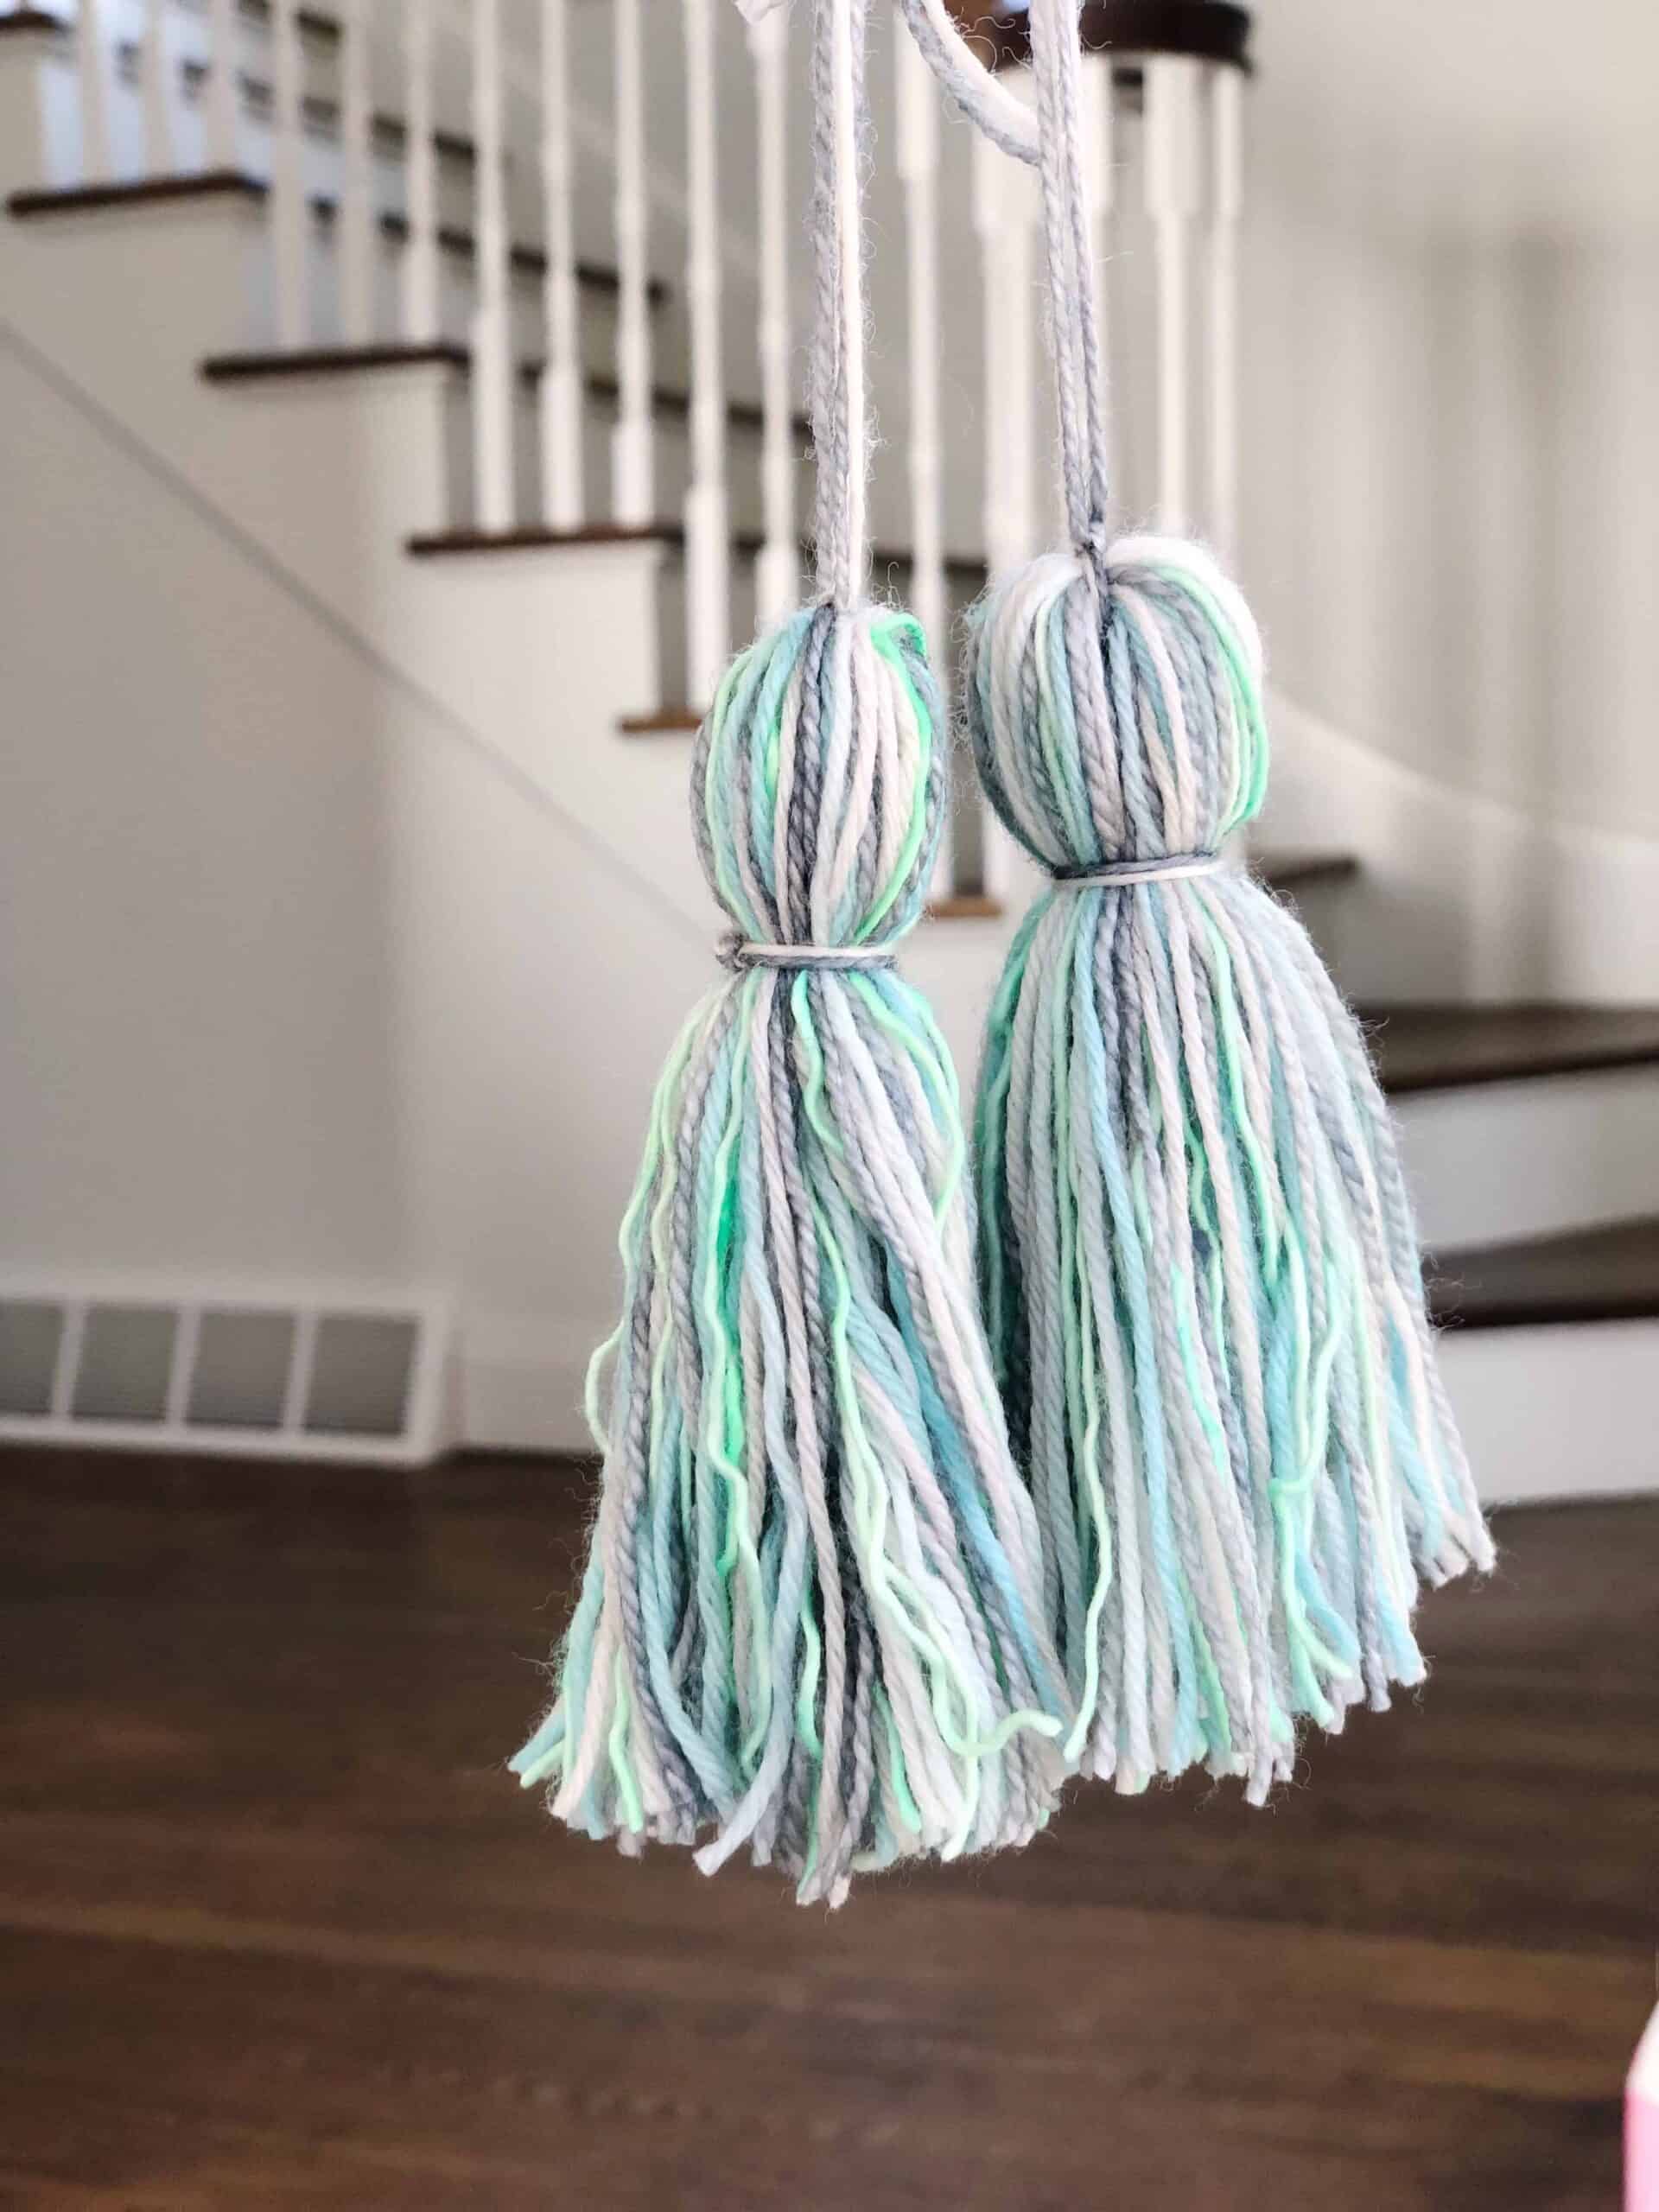 How to Make a Tassel with Yarn – in 5 Minutes